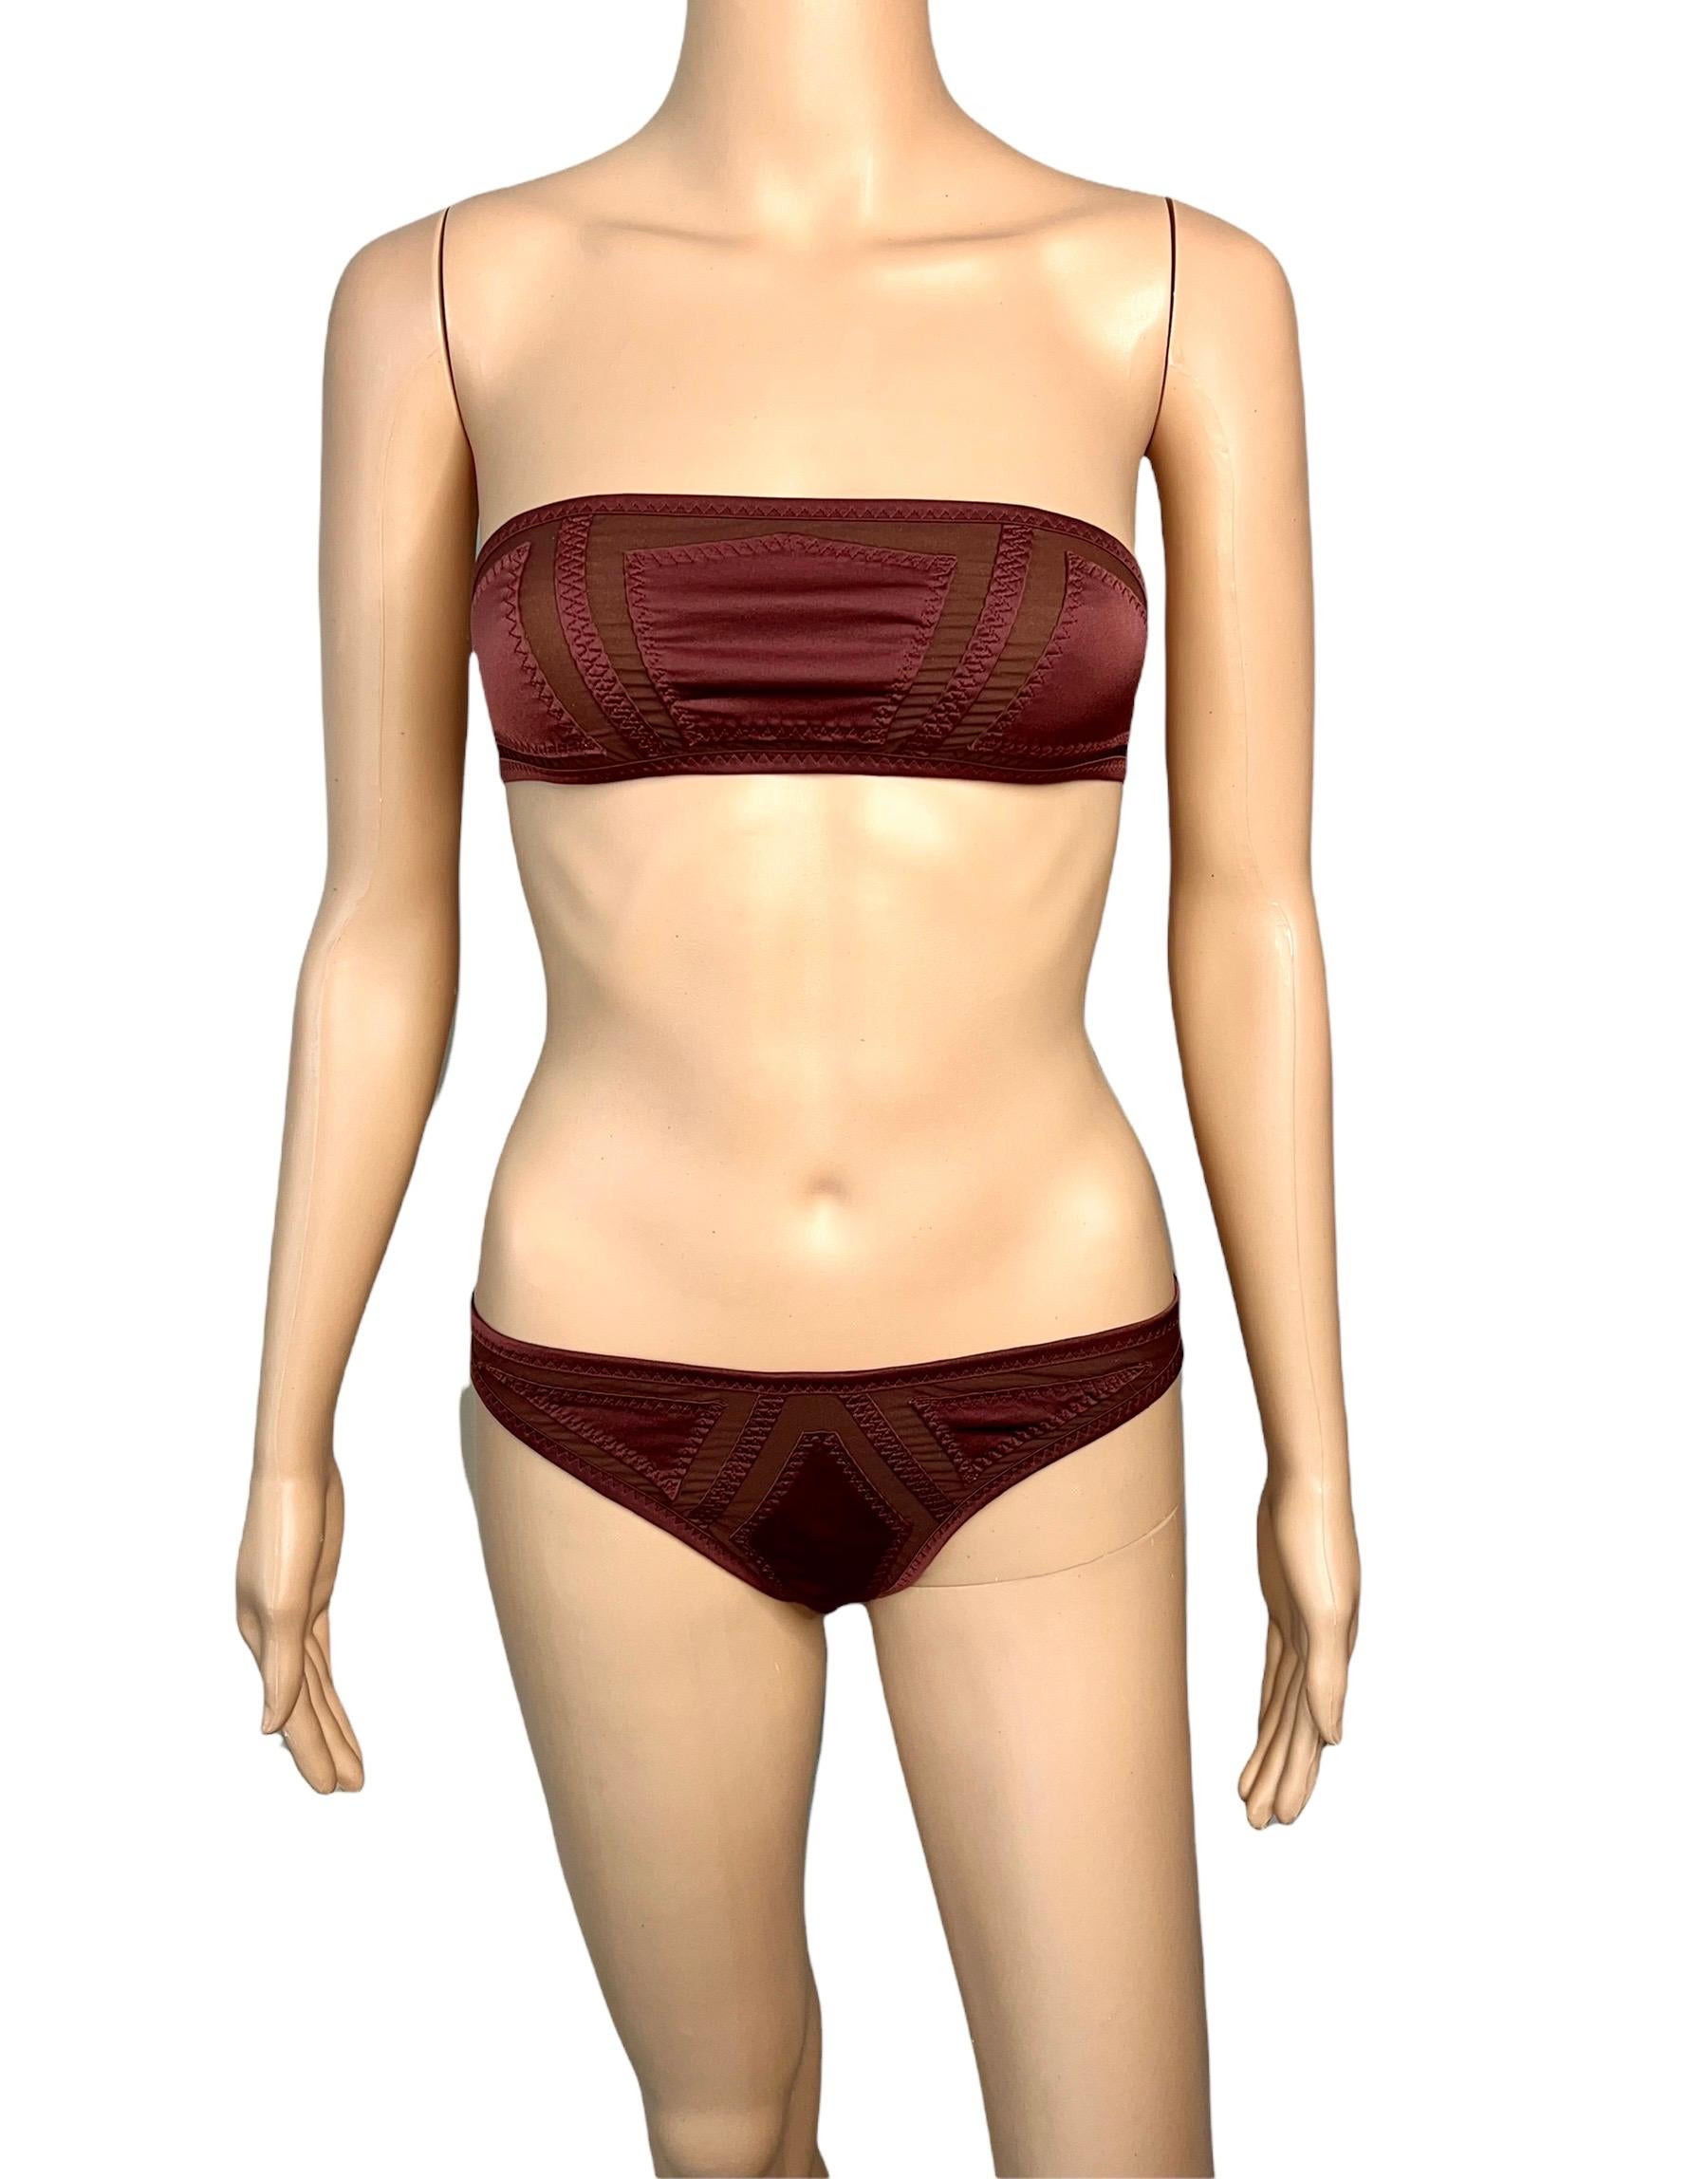 Gucci S/S 2005 Runway Cutout Sheer Panels Two-Piece Bikini Swimsuit Swimwear Size XS

Look 24 from the Spring 2005 Collection.

Excellent Condition